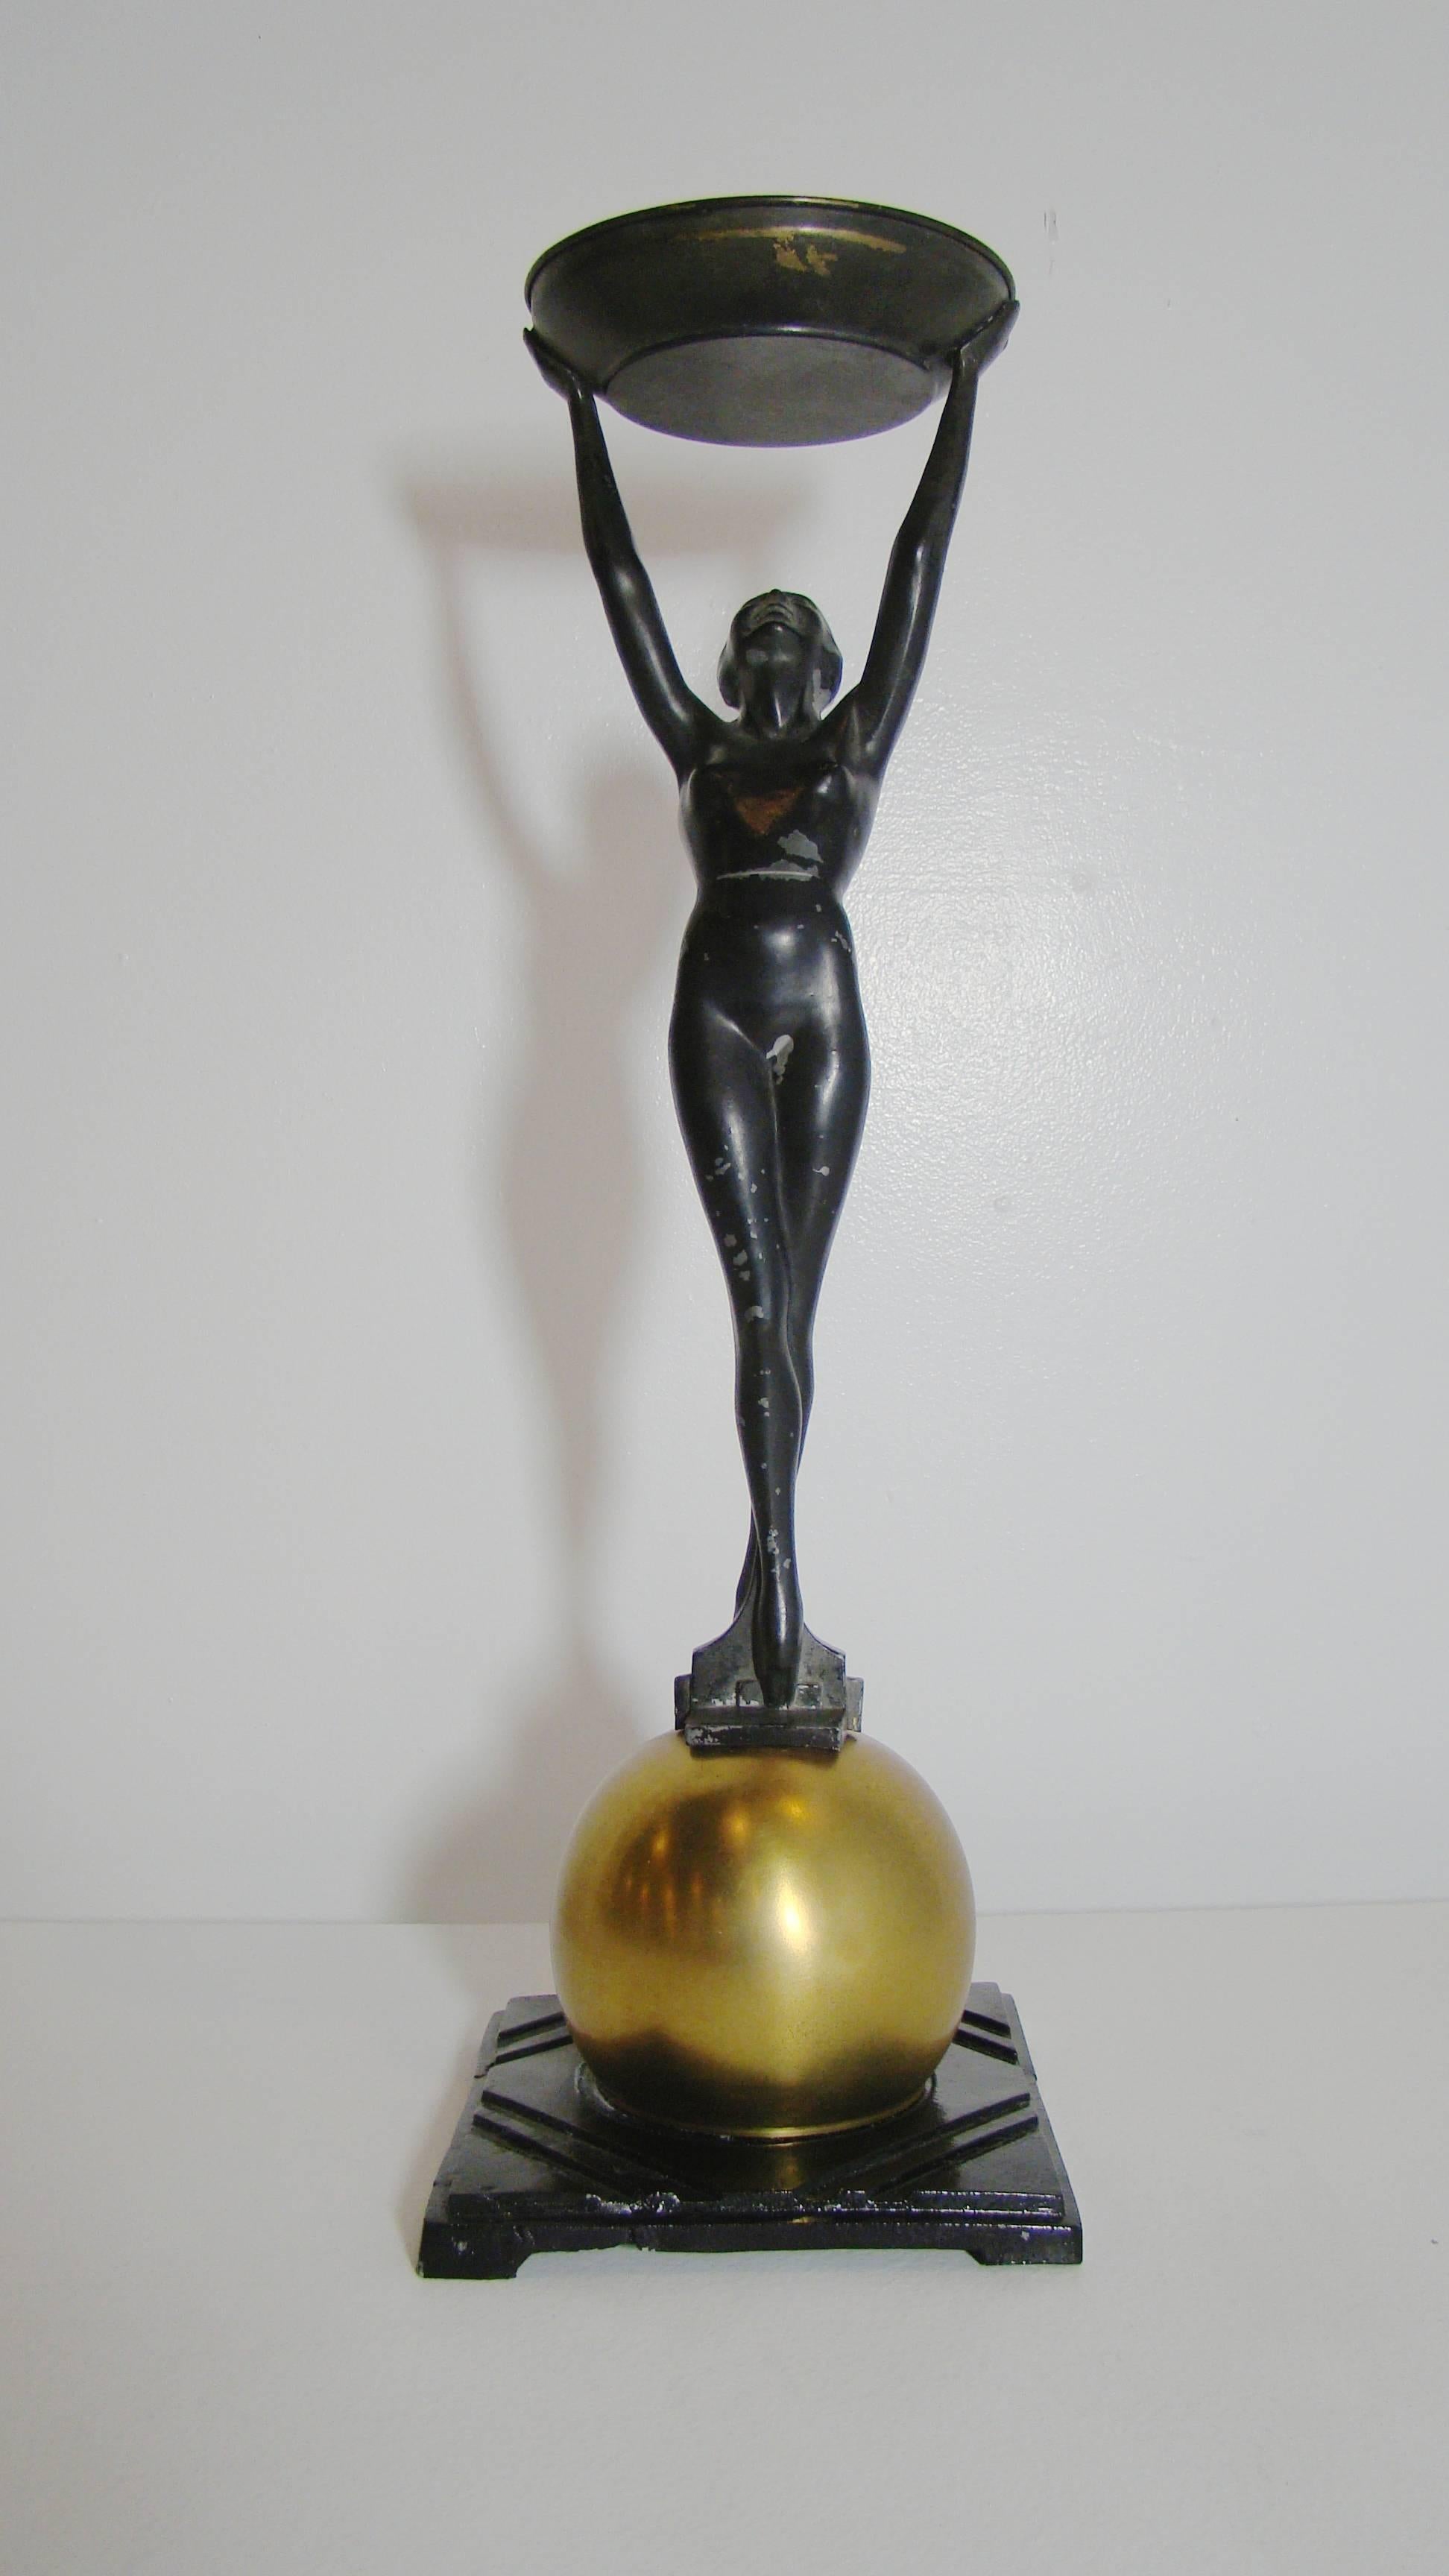 Early 20th Century American Art Deco Frankart Nude Metal Two-Foot Ashstand T 330, circa 1920s